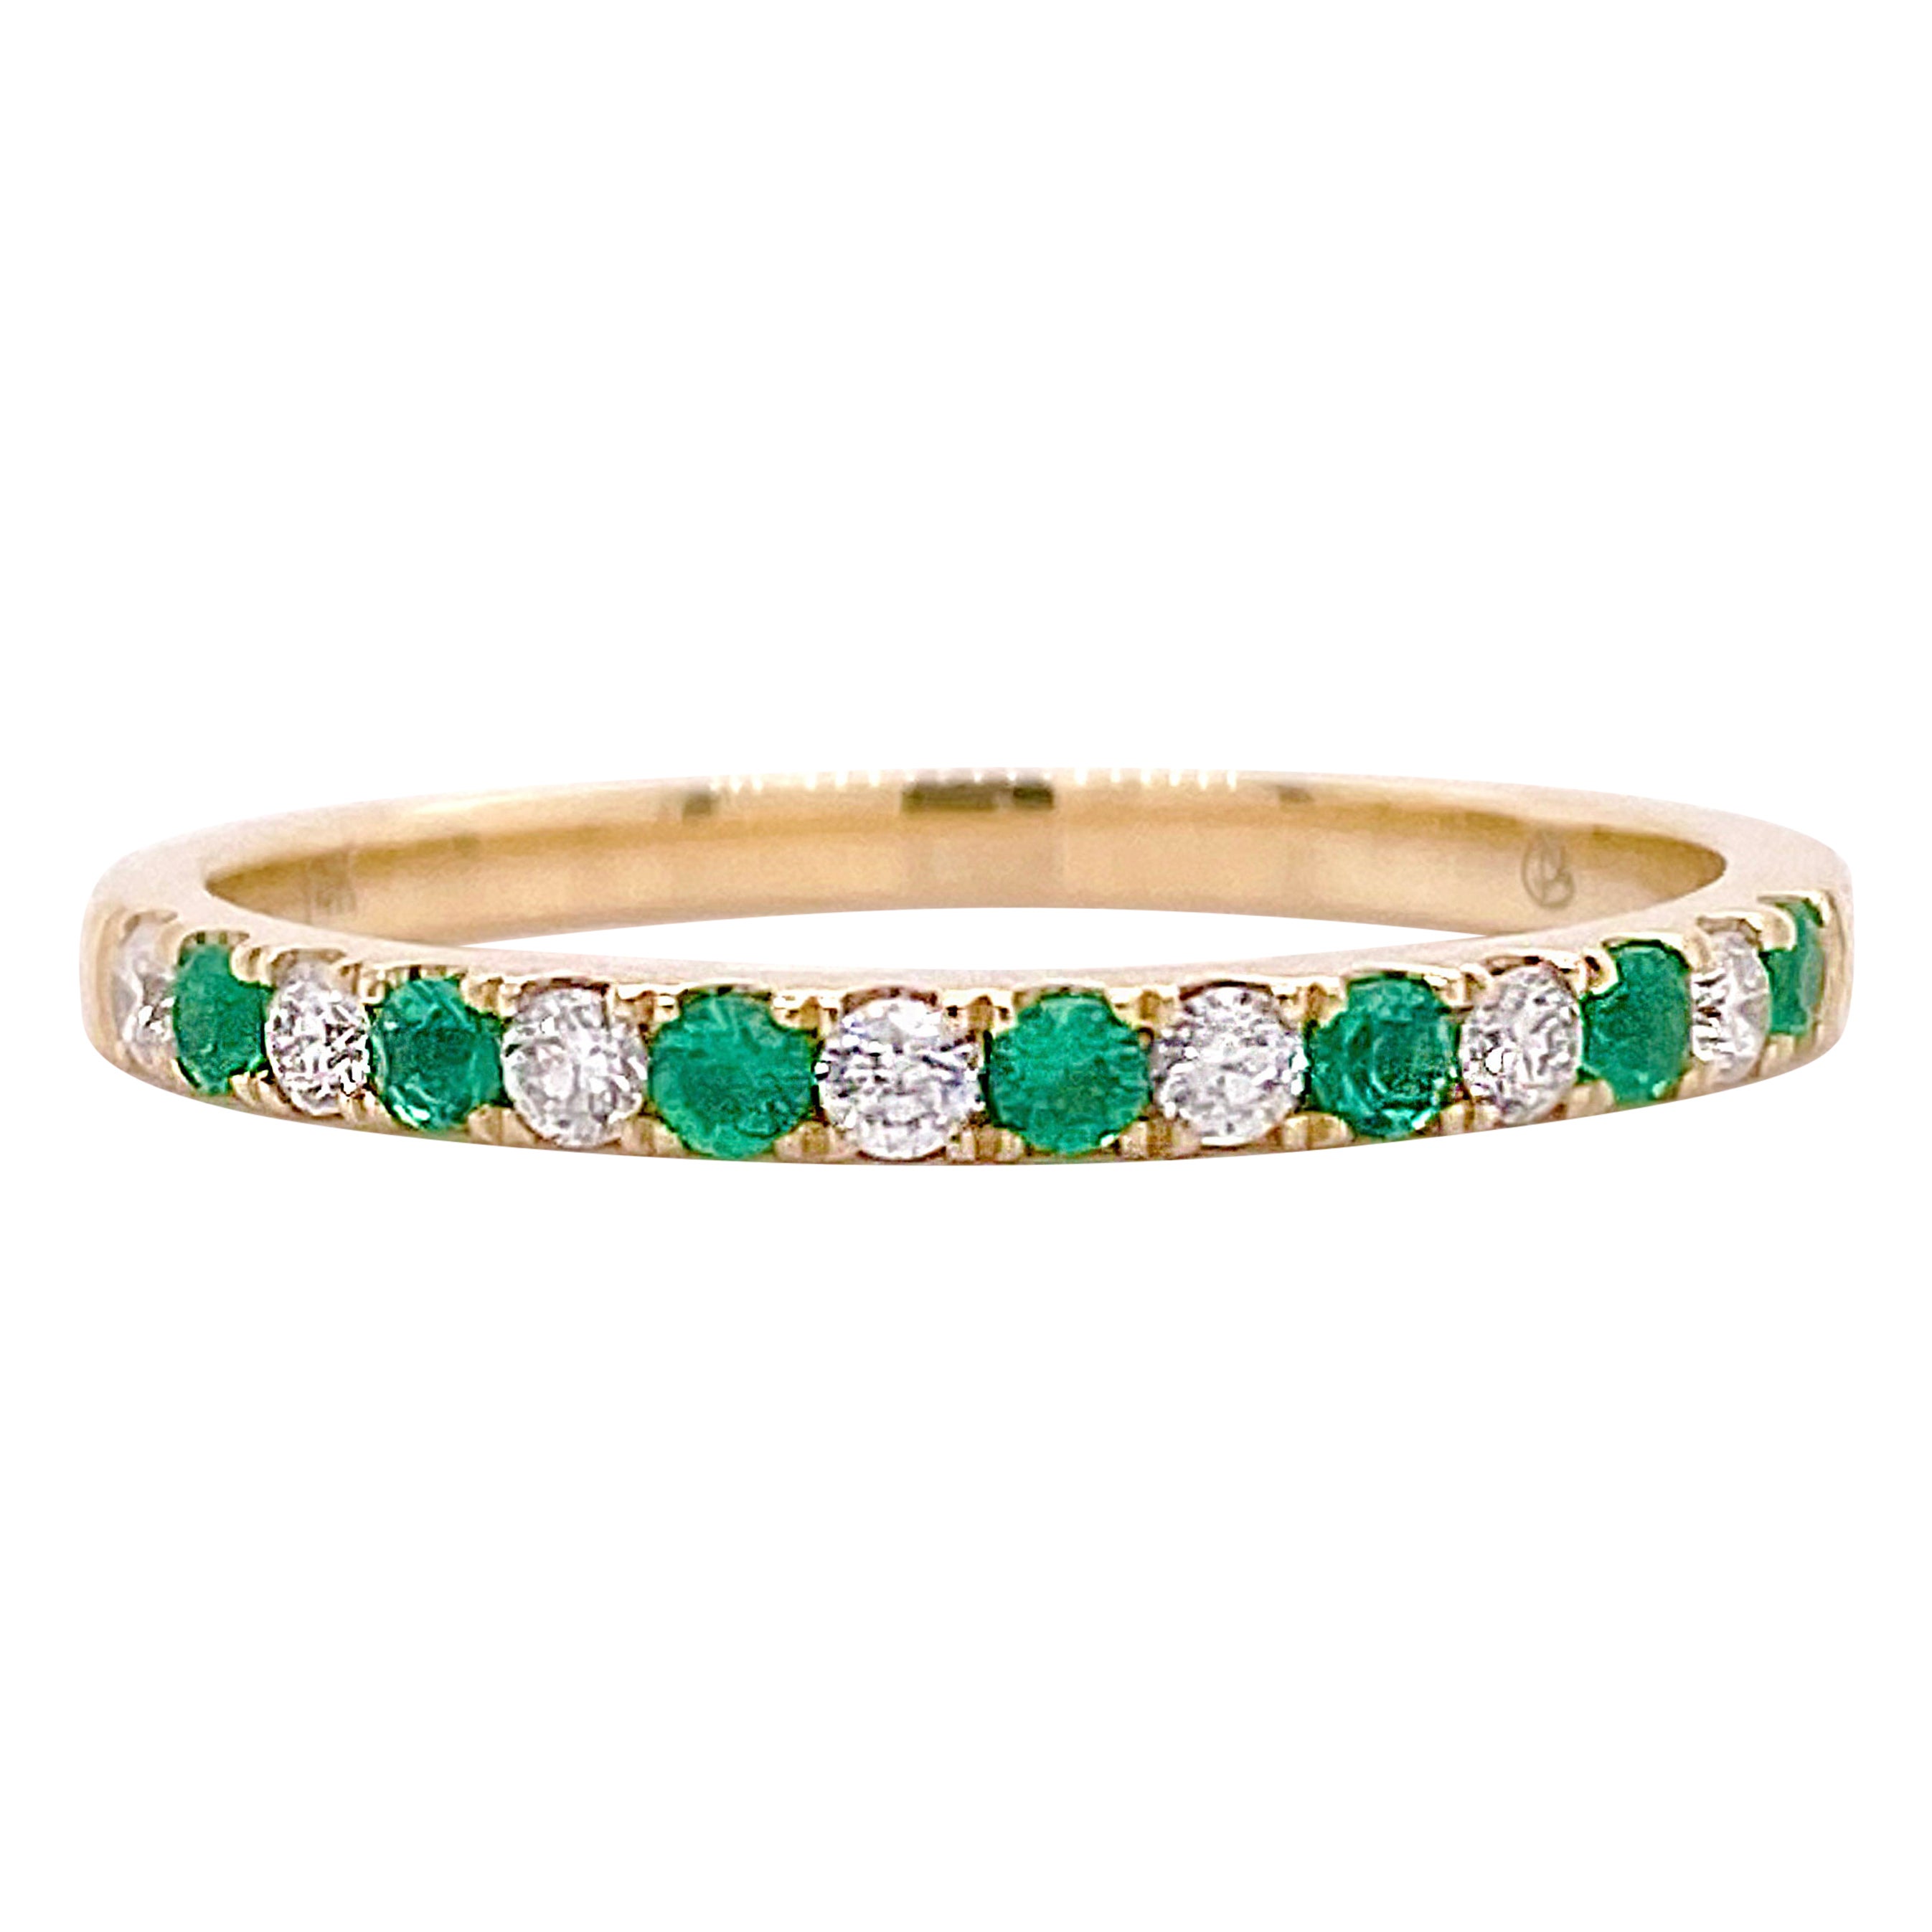 Diamond Emerald Band, Yellow Gold Wedding Ring, Green Emeralds and White Diamond For Sale